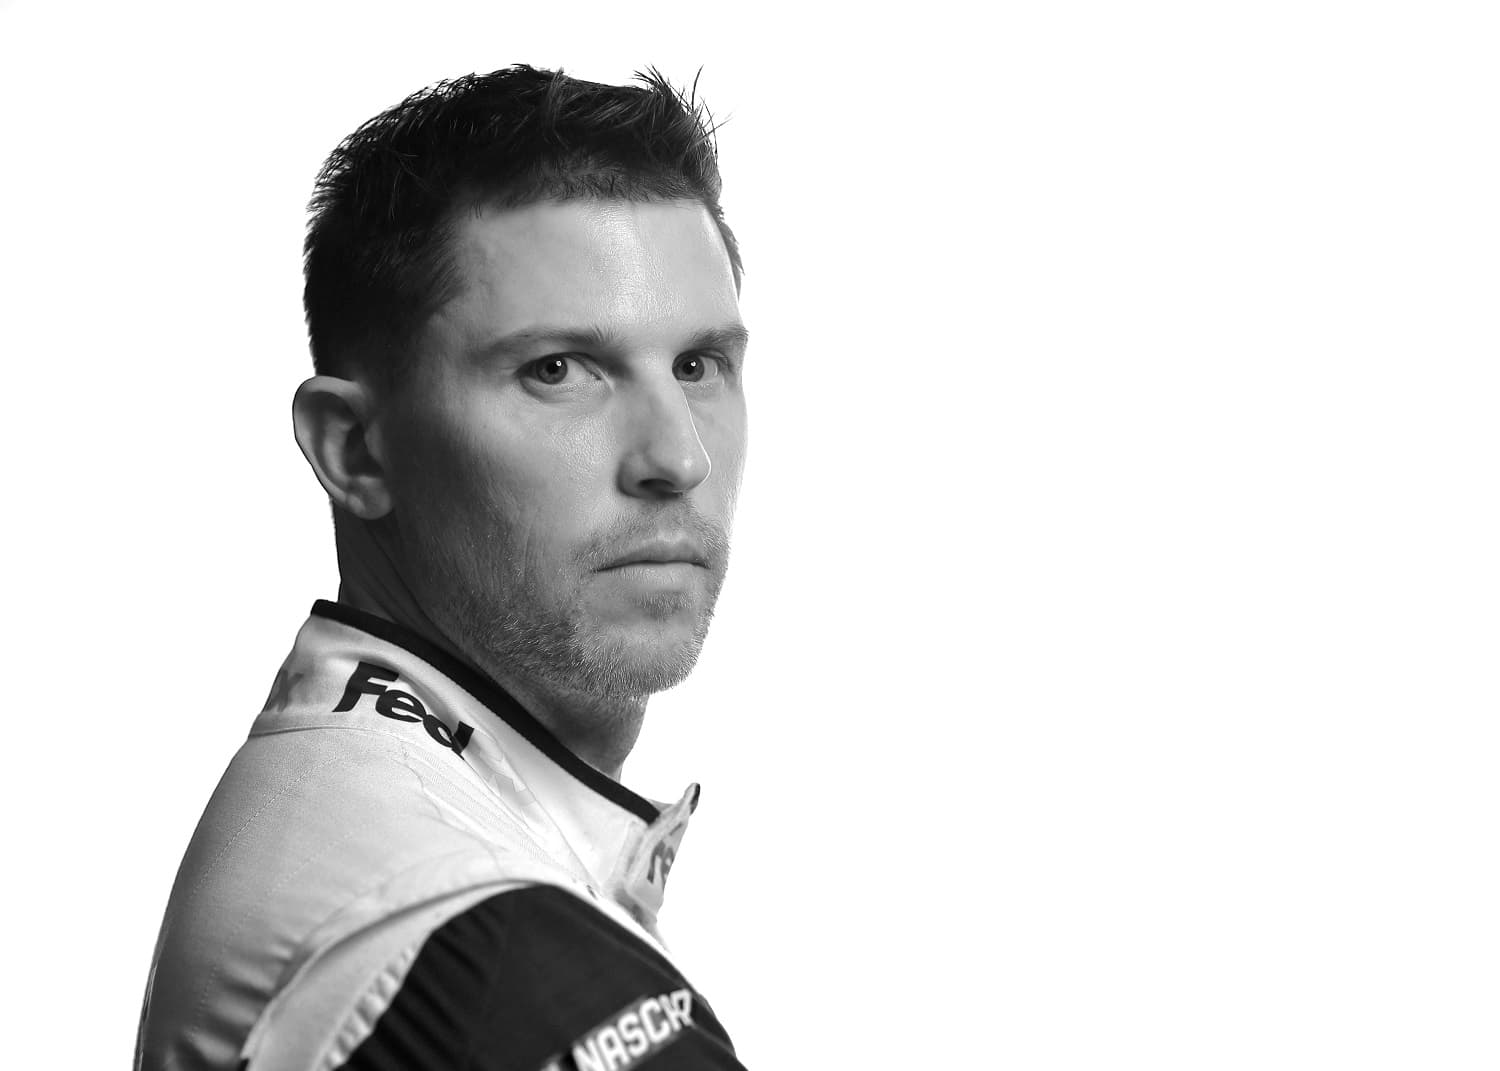 NASCAR driver Denny Hamlin poses for a photo during NASCAR Production Days at Charlotte Convention Center on Jan. 18, 2023 in Charlotte, North Carolina.